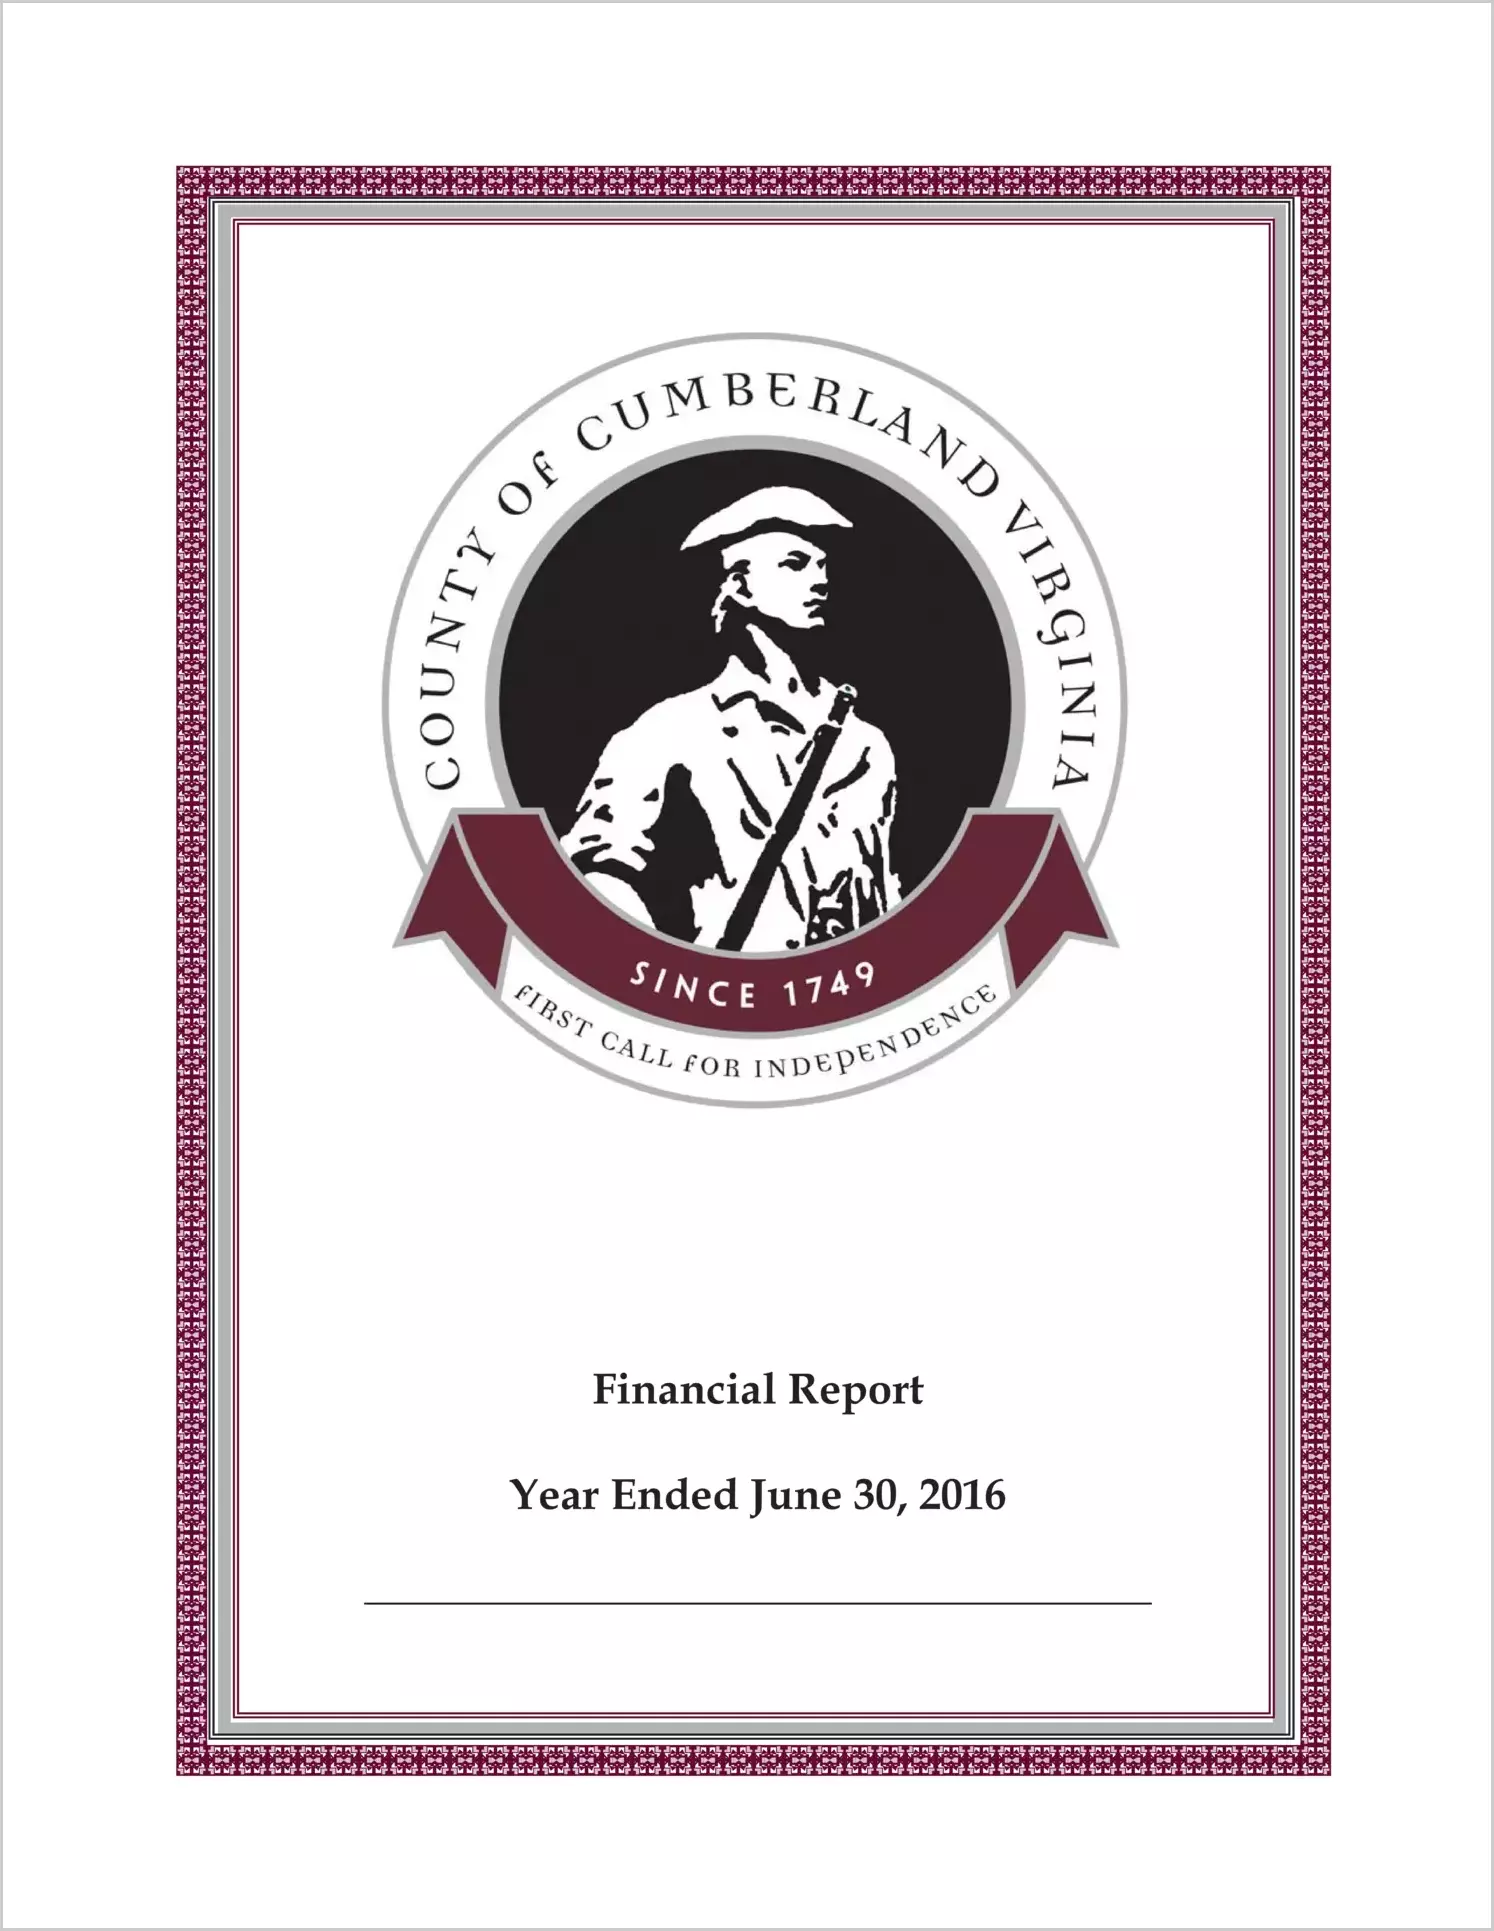 2016 Annual Financial Report for County of Cumberland